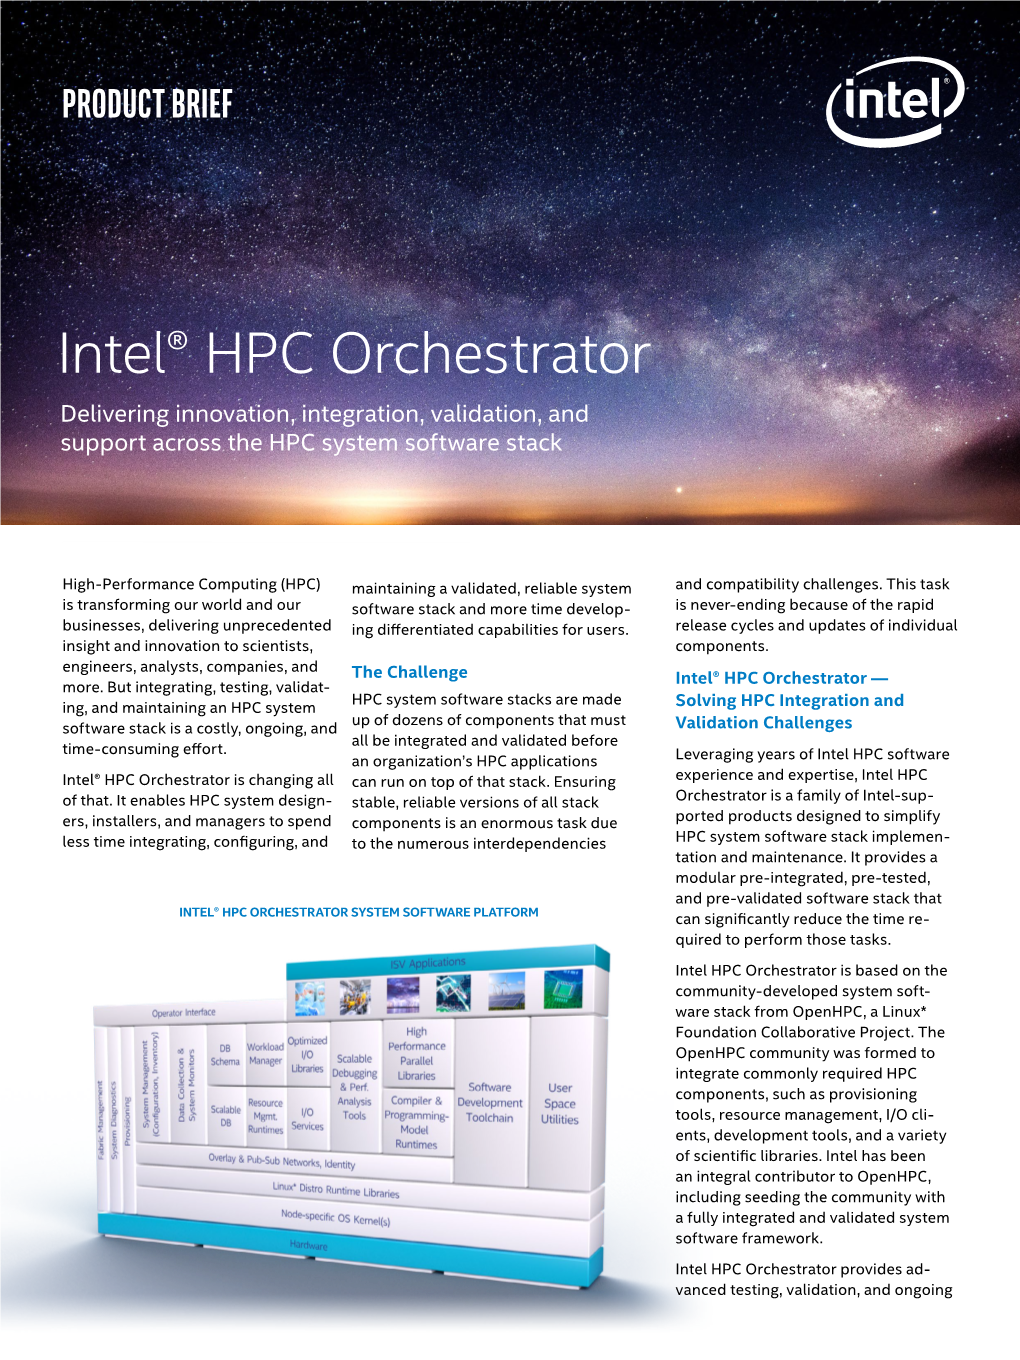 Intel® HPC Orchestrator Delivering Innovation, Integration, Validation, and Support Across the HPC System Software Stack